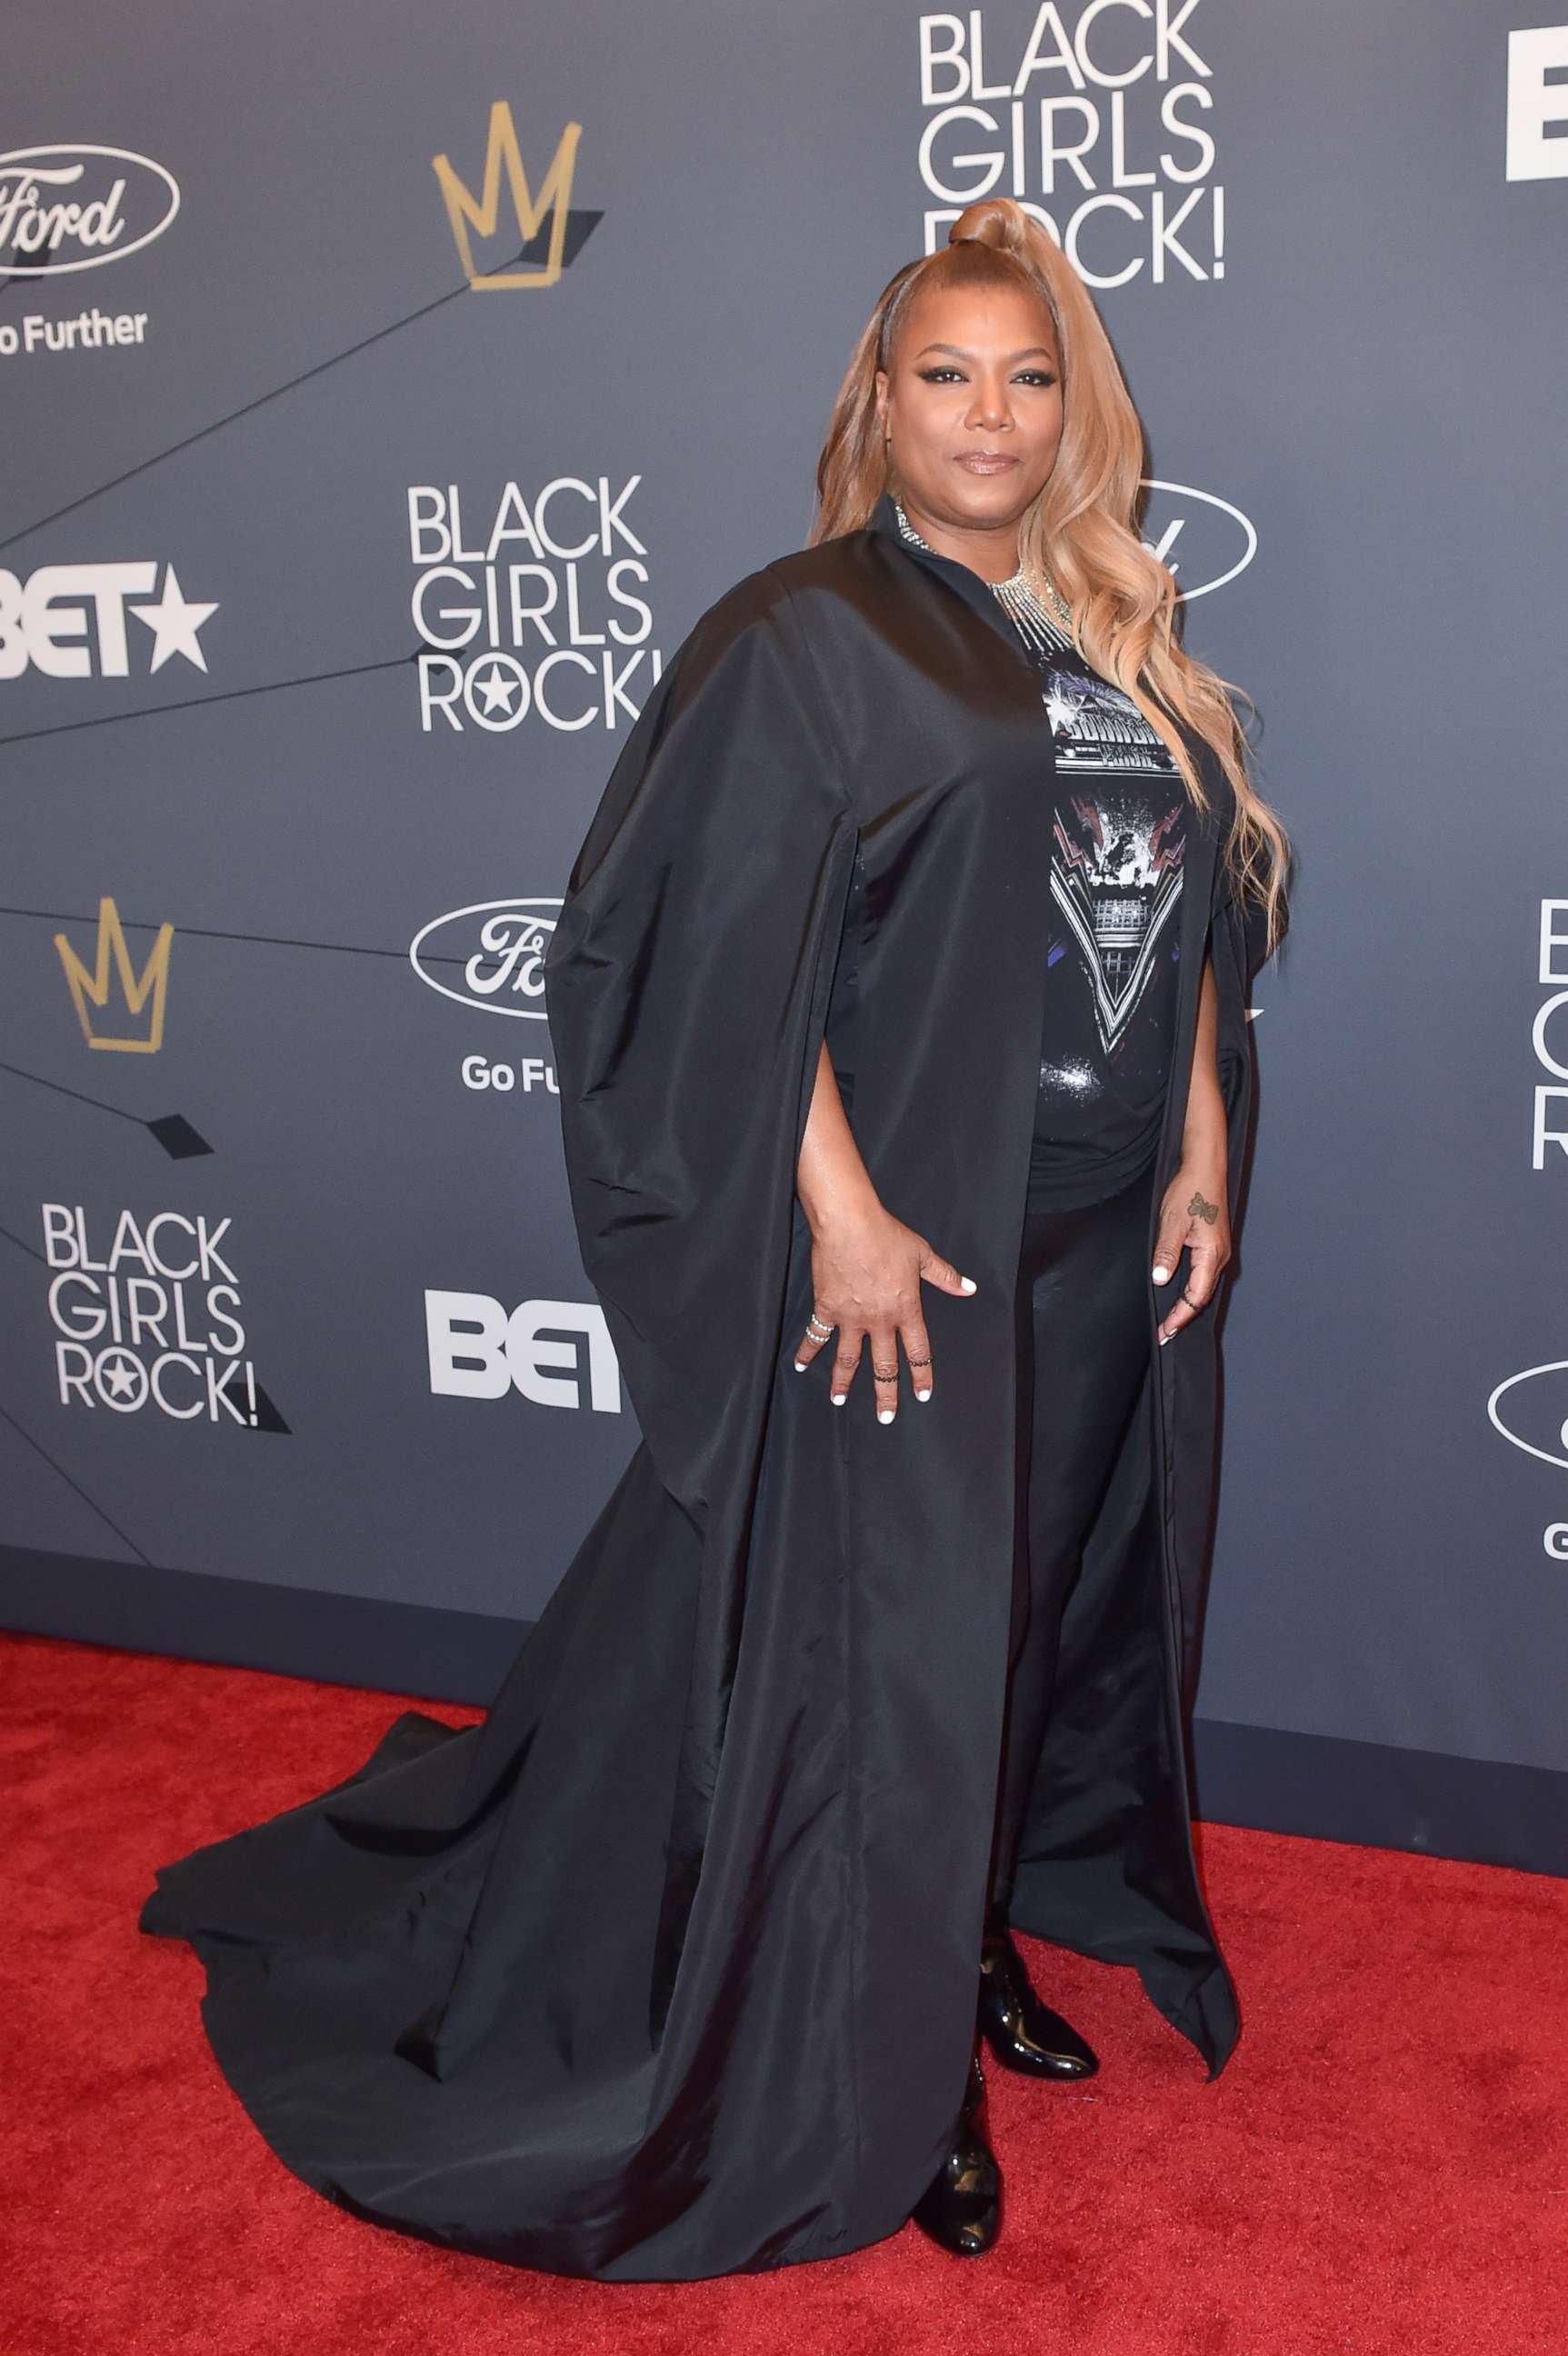 PHOTO: Singer/Actress Queen Latifah attends the Black Girls Rock! Red Carpet at the New Jersey Performing Arts Center, Aug. 26, 2018, in Newark, N.J.